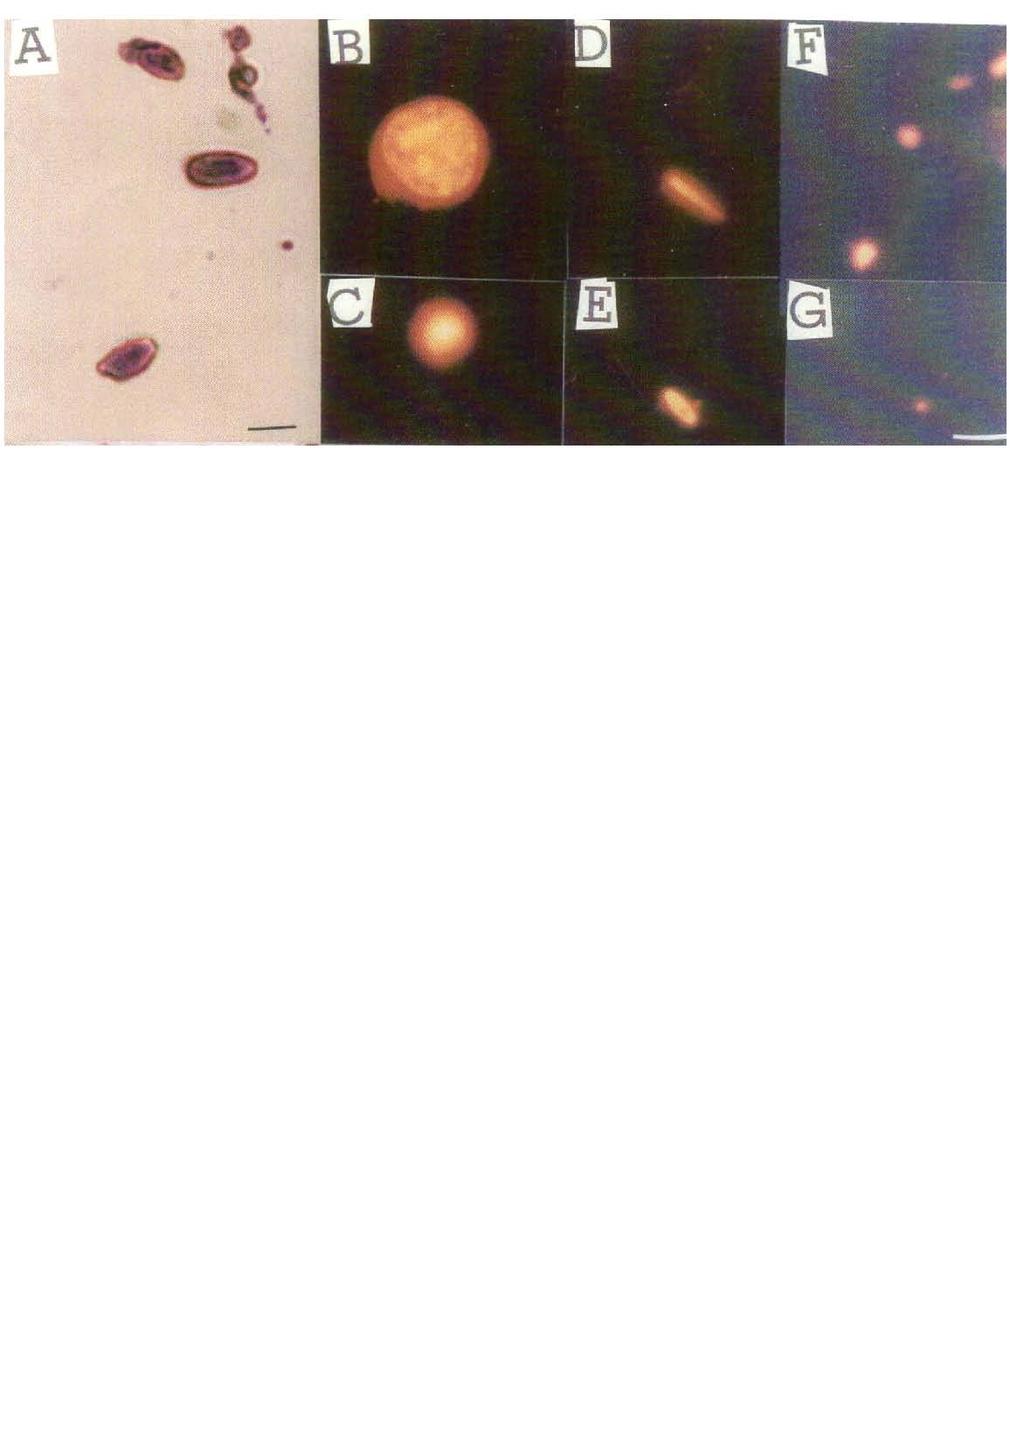 A: After 15 minutes of the addition, Sph- DNA aggregates (arrow) were observed on the L-M cells. After 3 hours of the addition, the destruction of the cells (arrow) were observed (B).